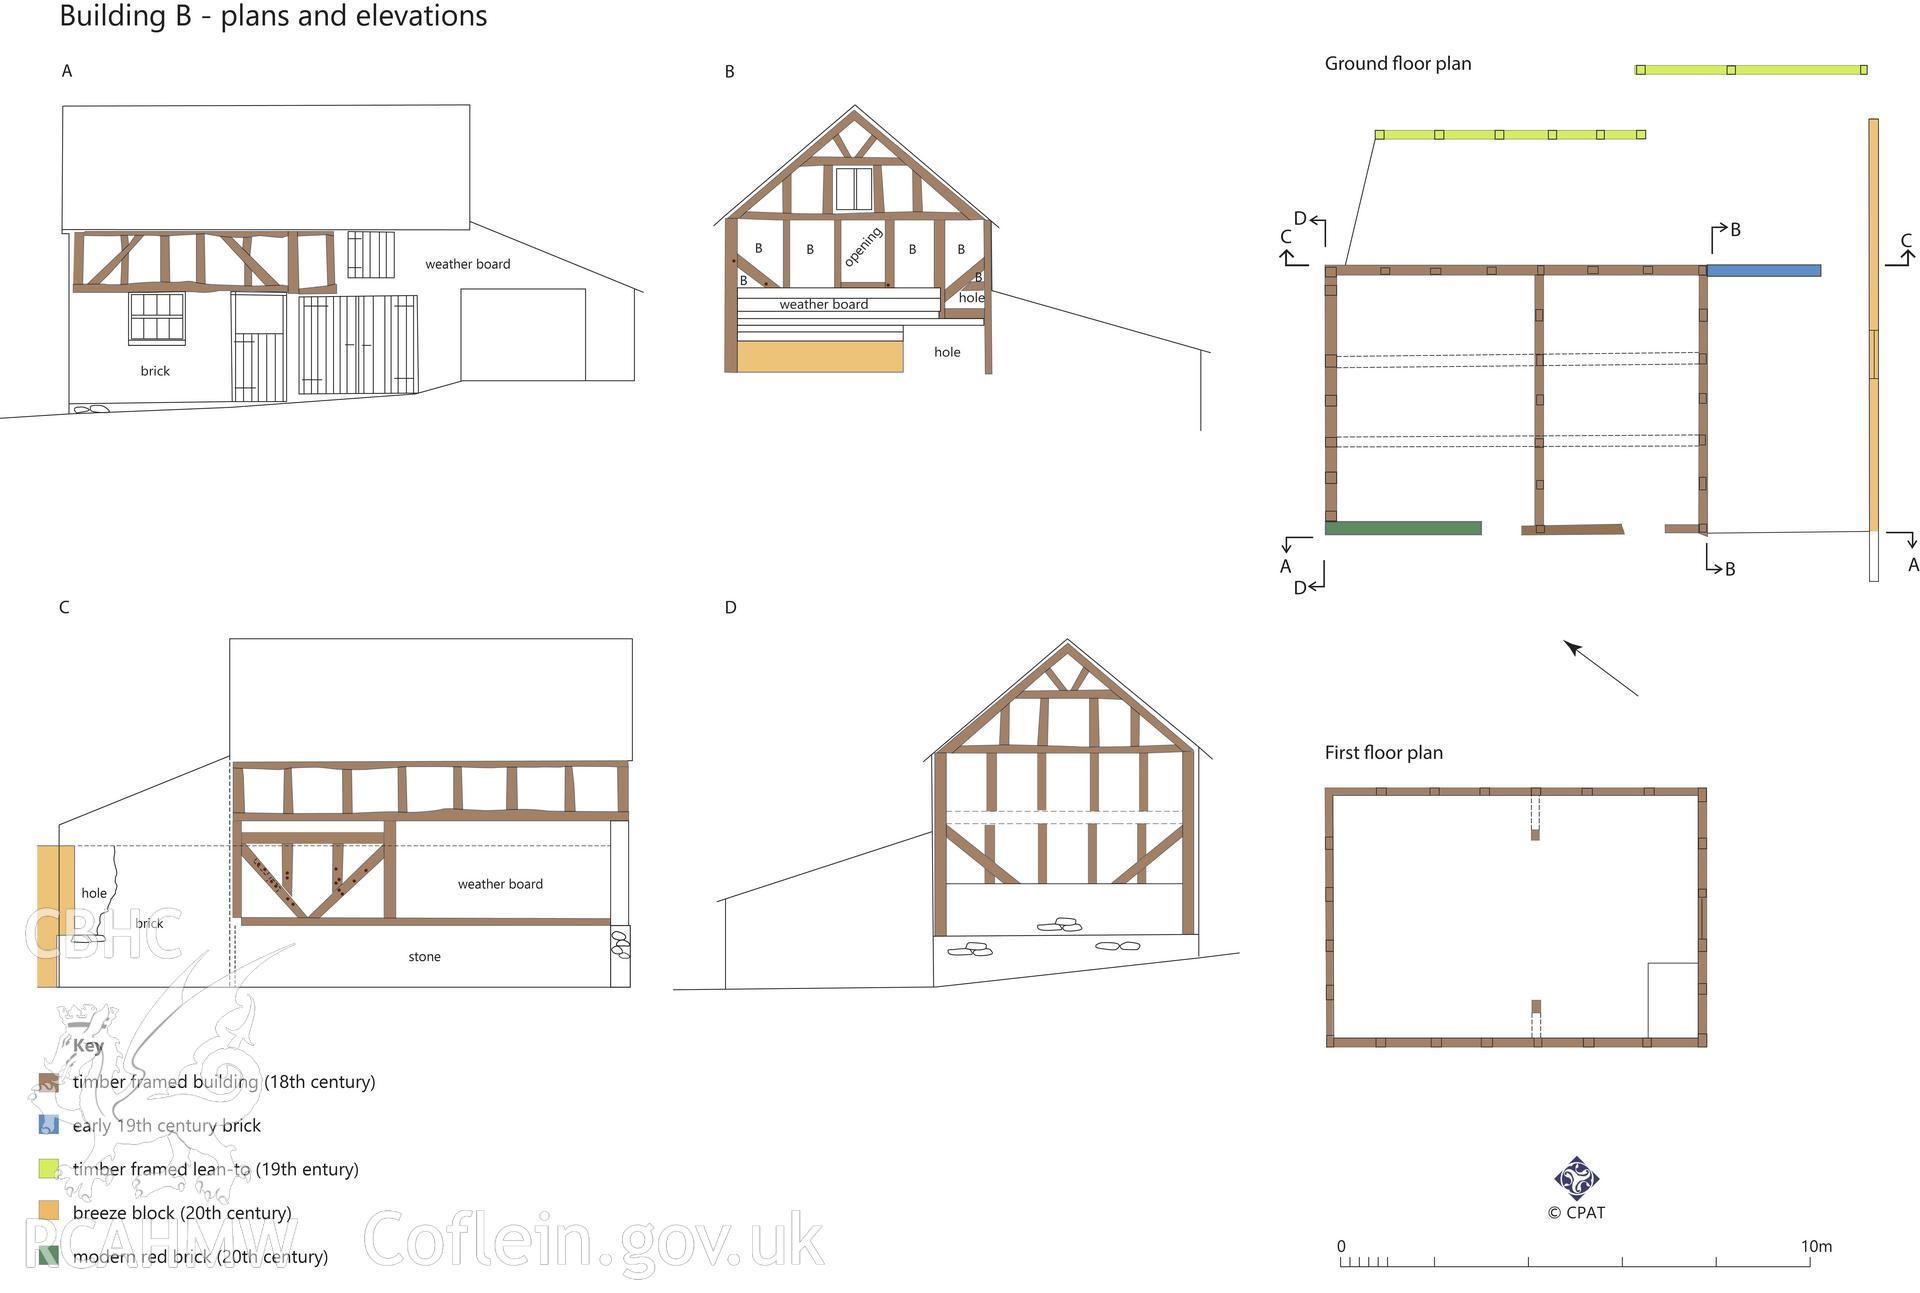 'Building B plans elevations' used as report illustration for CPAT Project 2414: Pentre Barns, Llandyssil, Powys - Building Survey. Prepared by Kate Pack of Clwyd Powys Archaeological Trust, 2019. Report no. 1694.